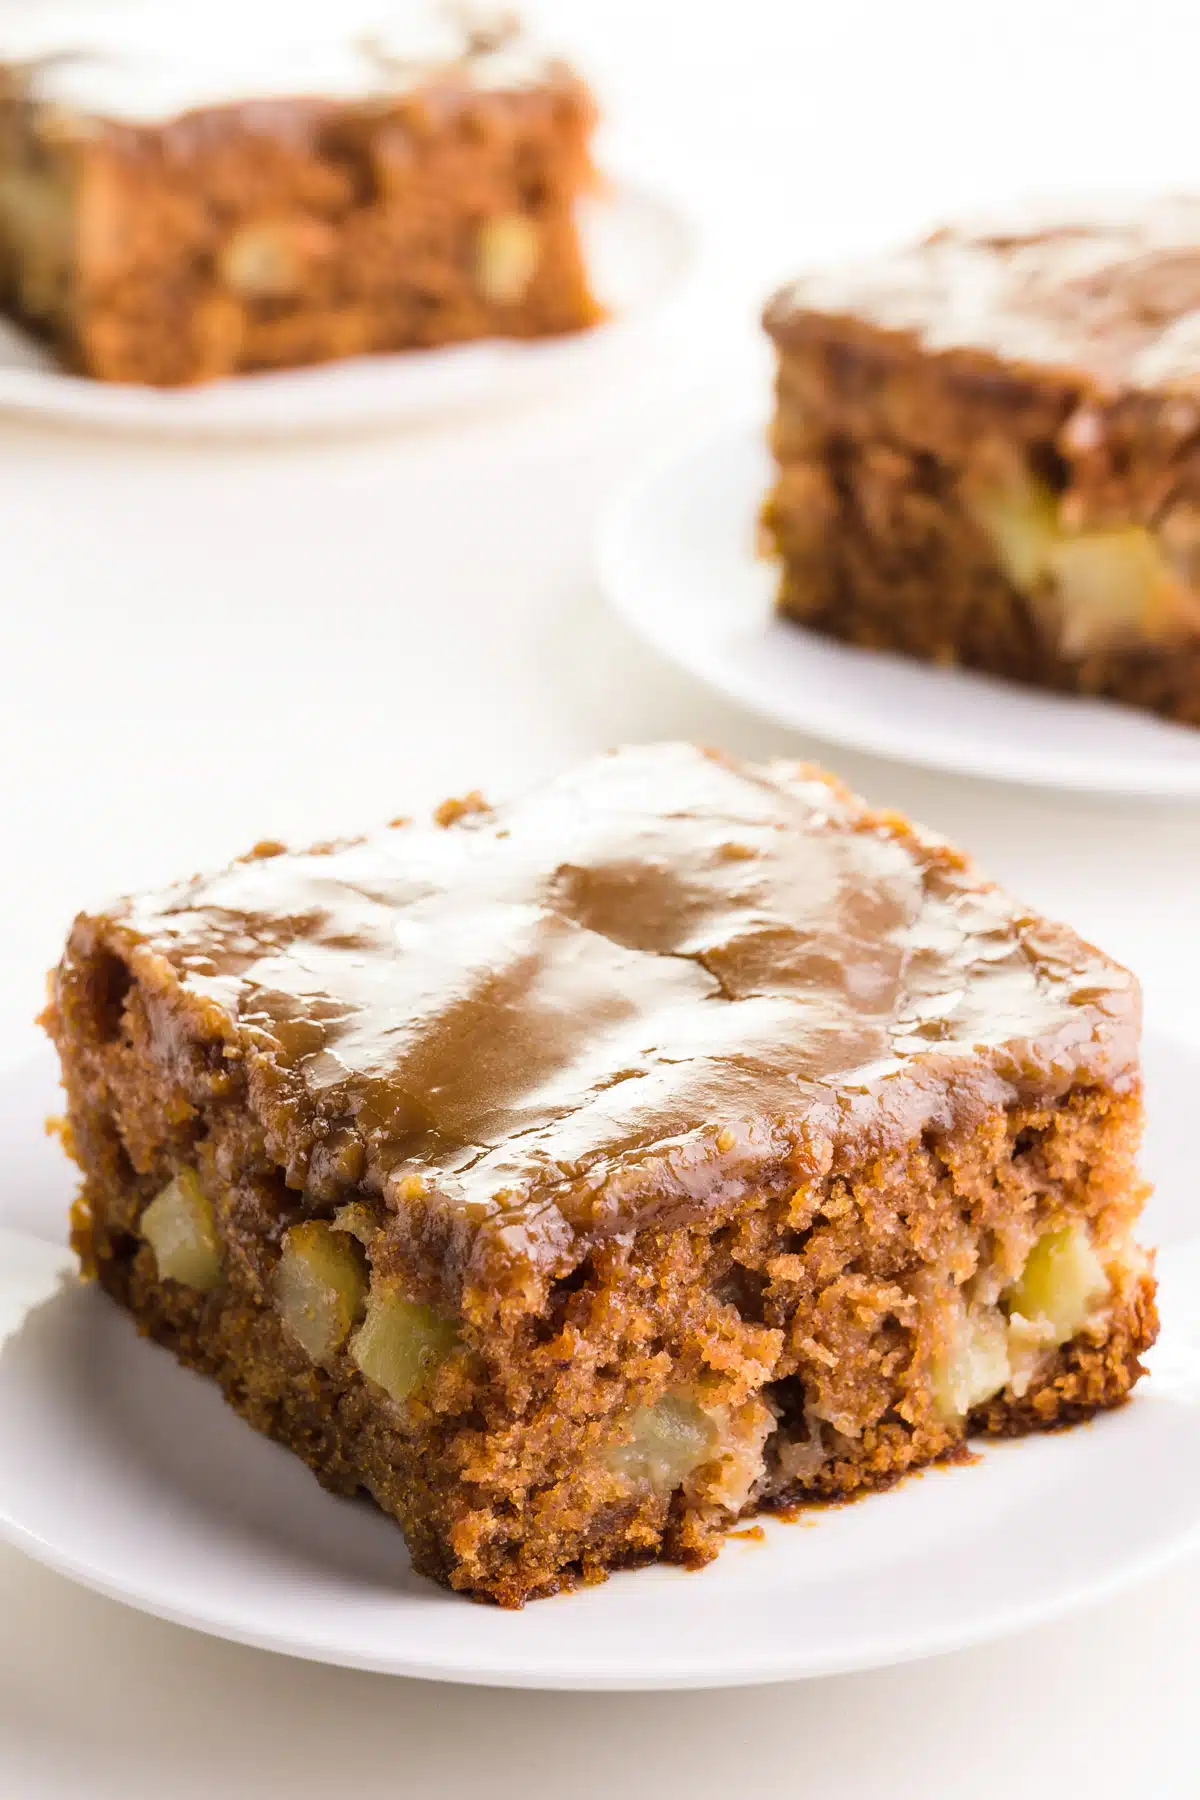 A slice of vegan apple cake sits on a plate in front of other slices in the background.